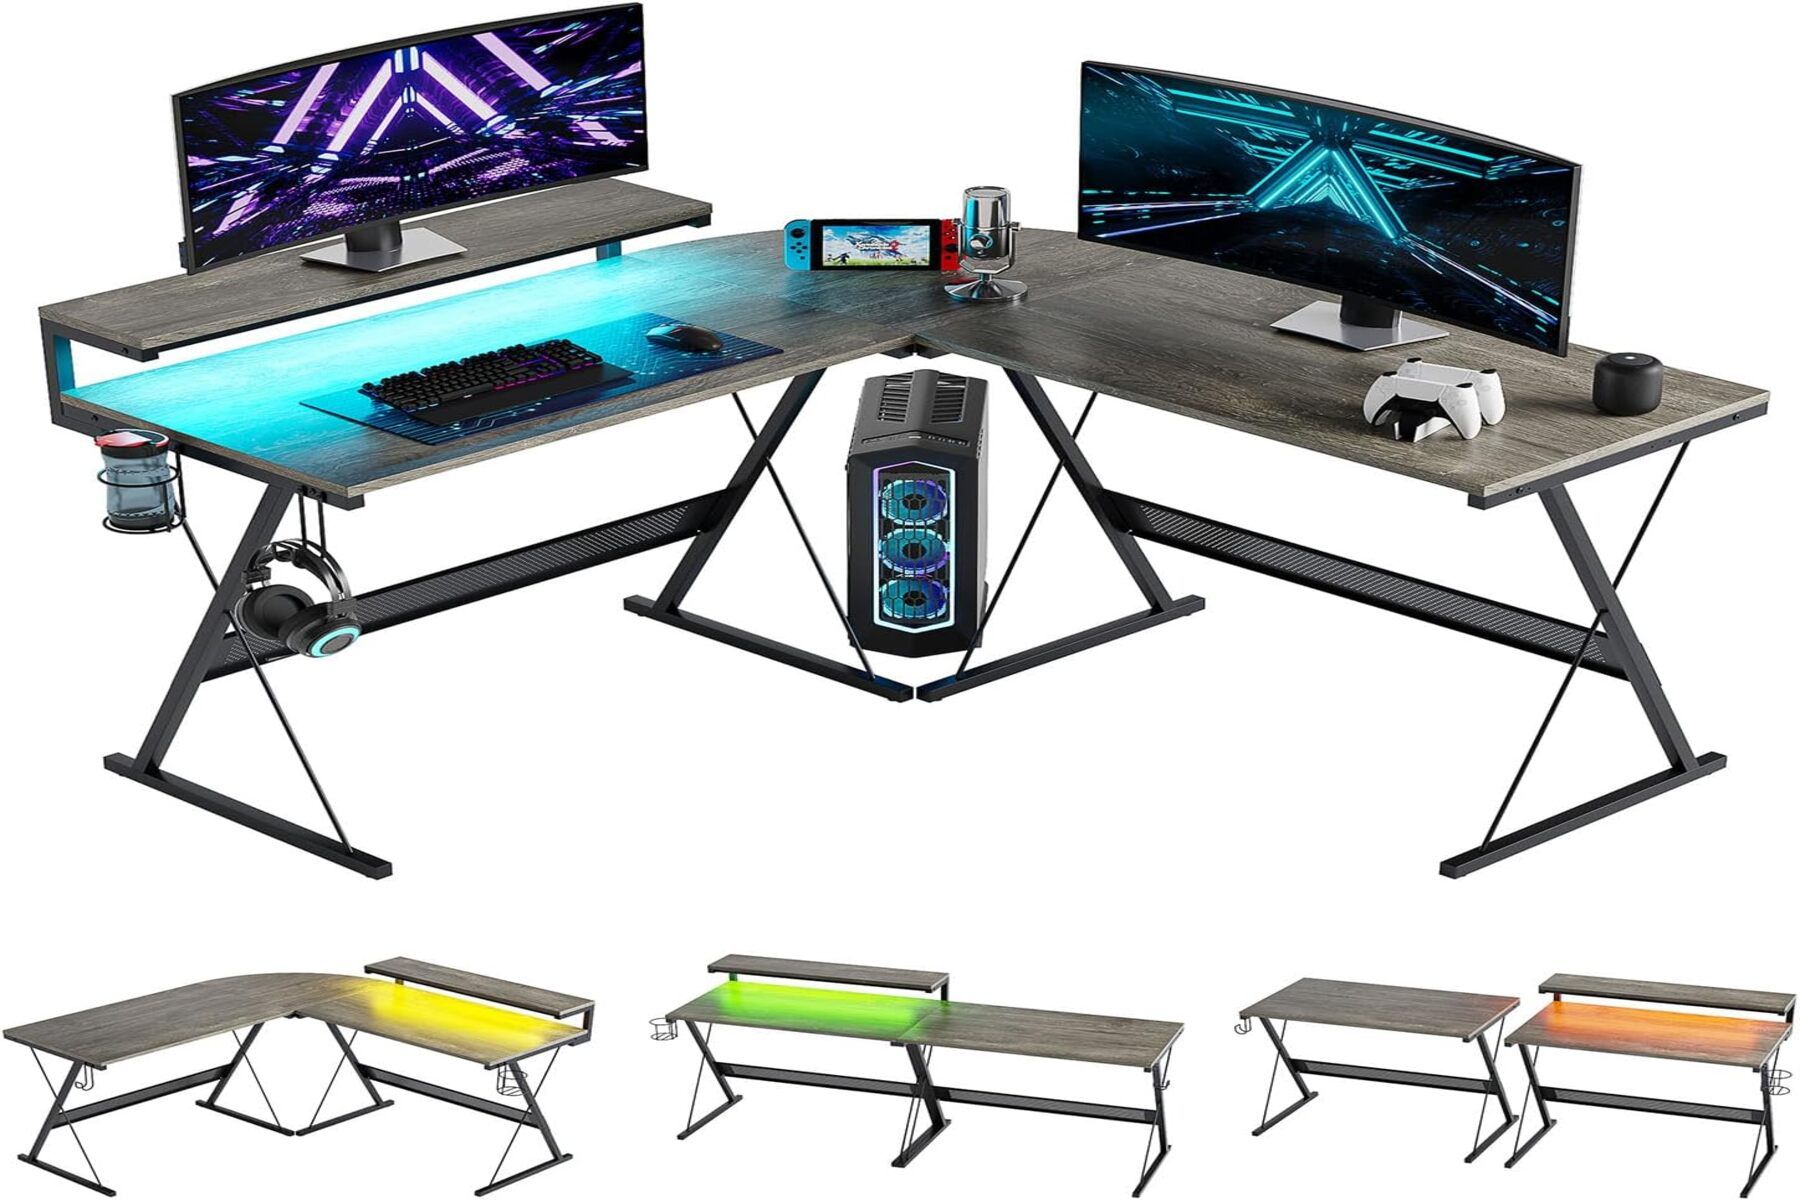 5 Cool Desk Décor for Guys in 2023